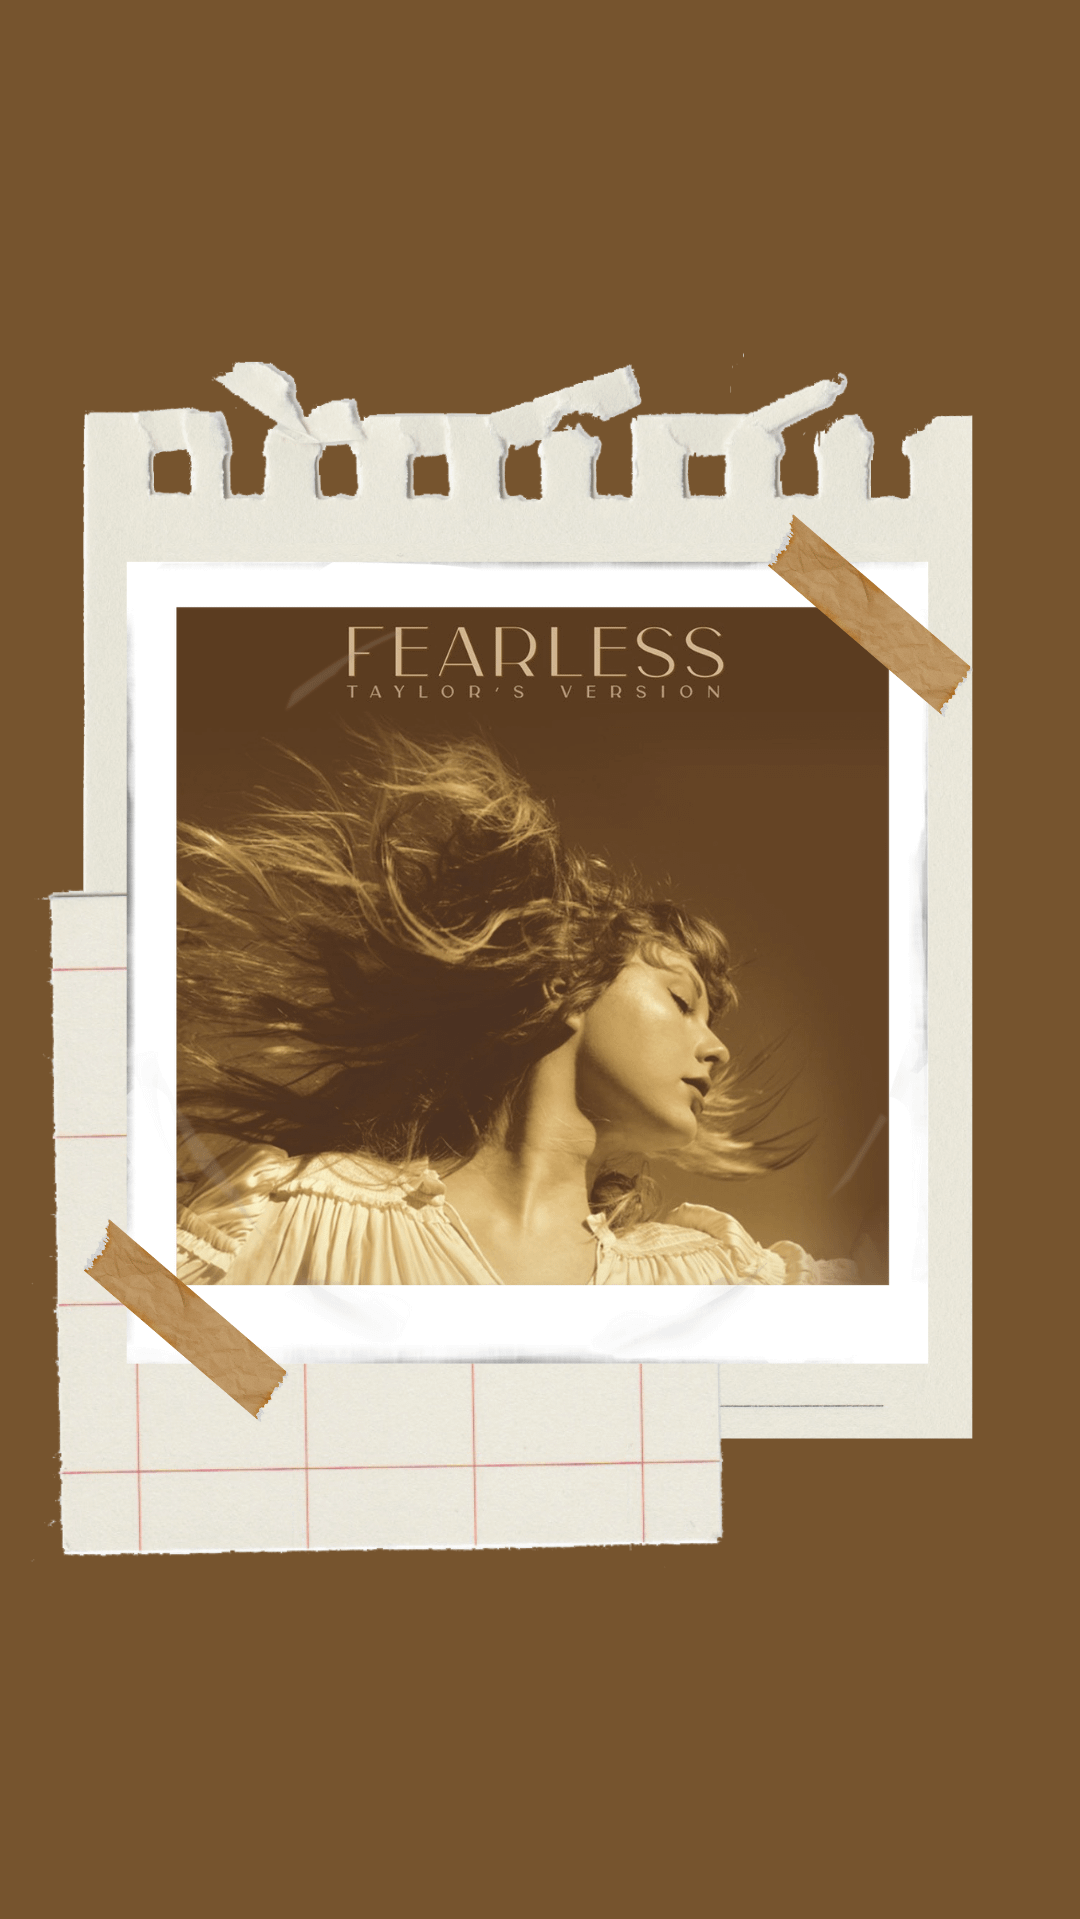 Fearless Wallpaper For Phone And Laptop Folklore Next R